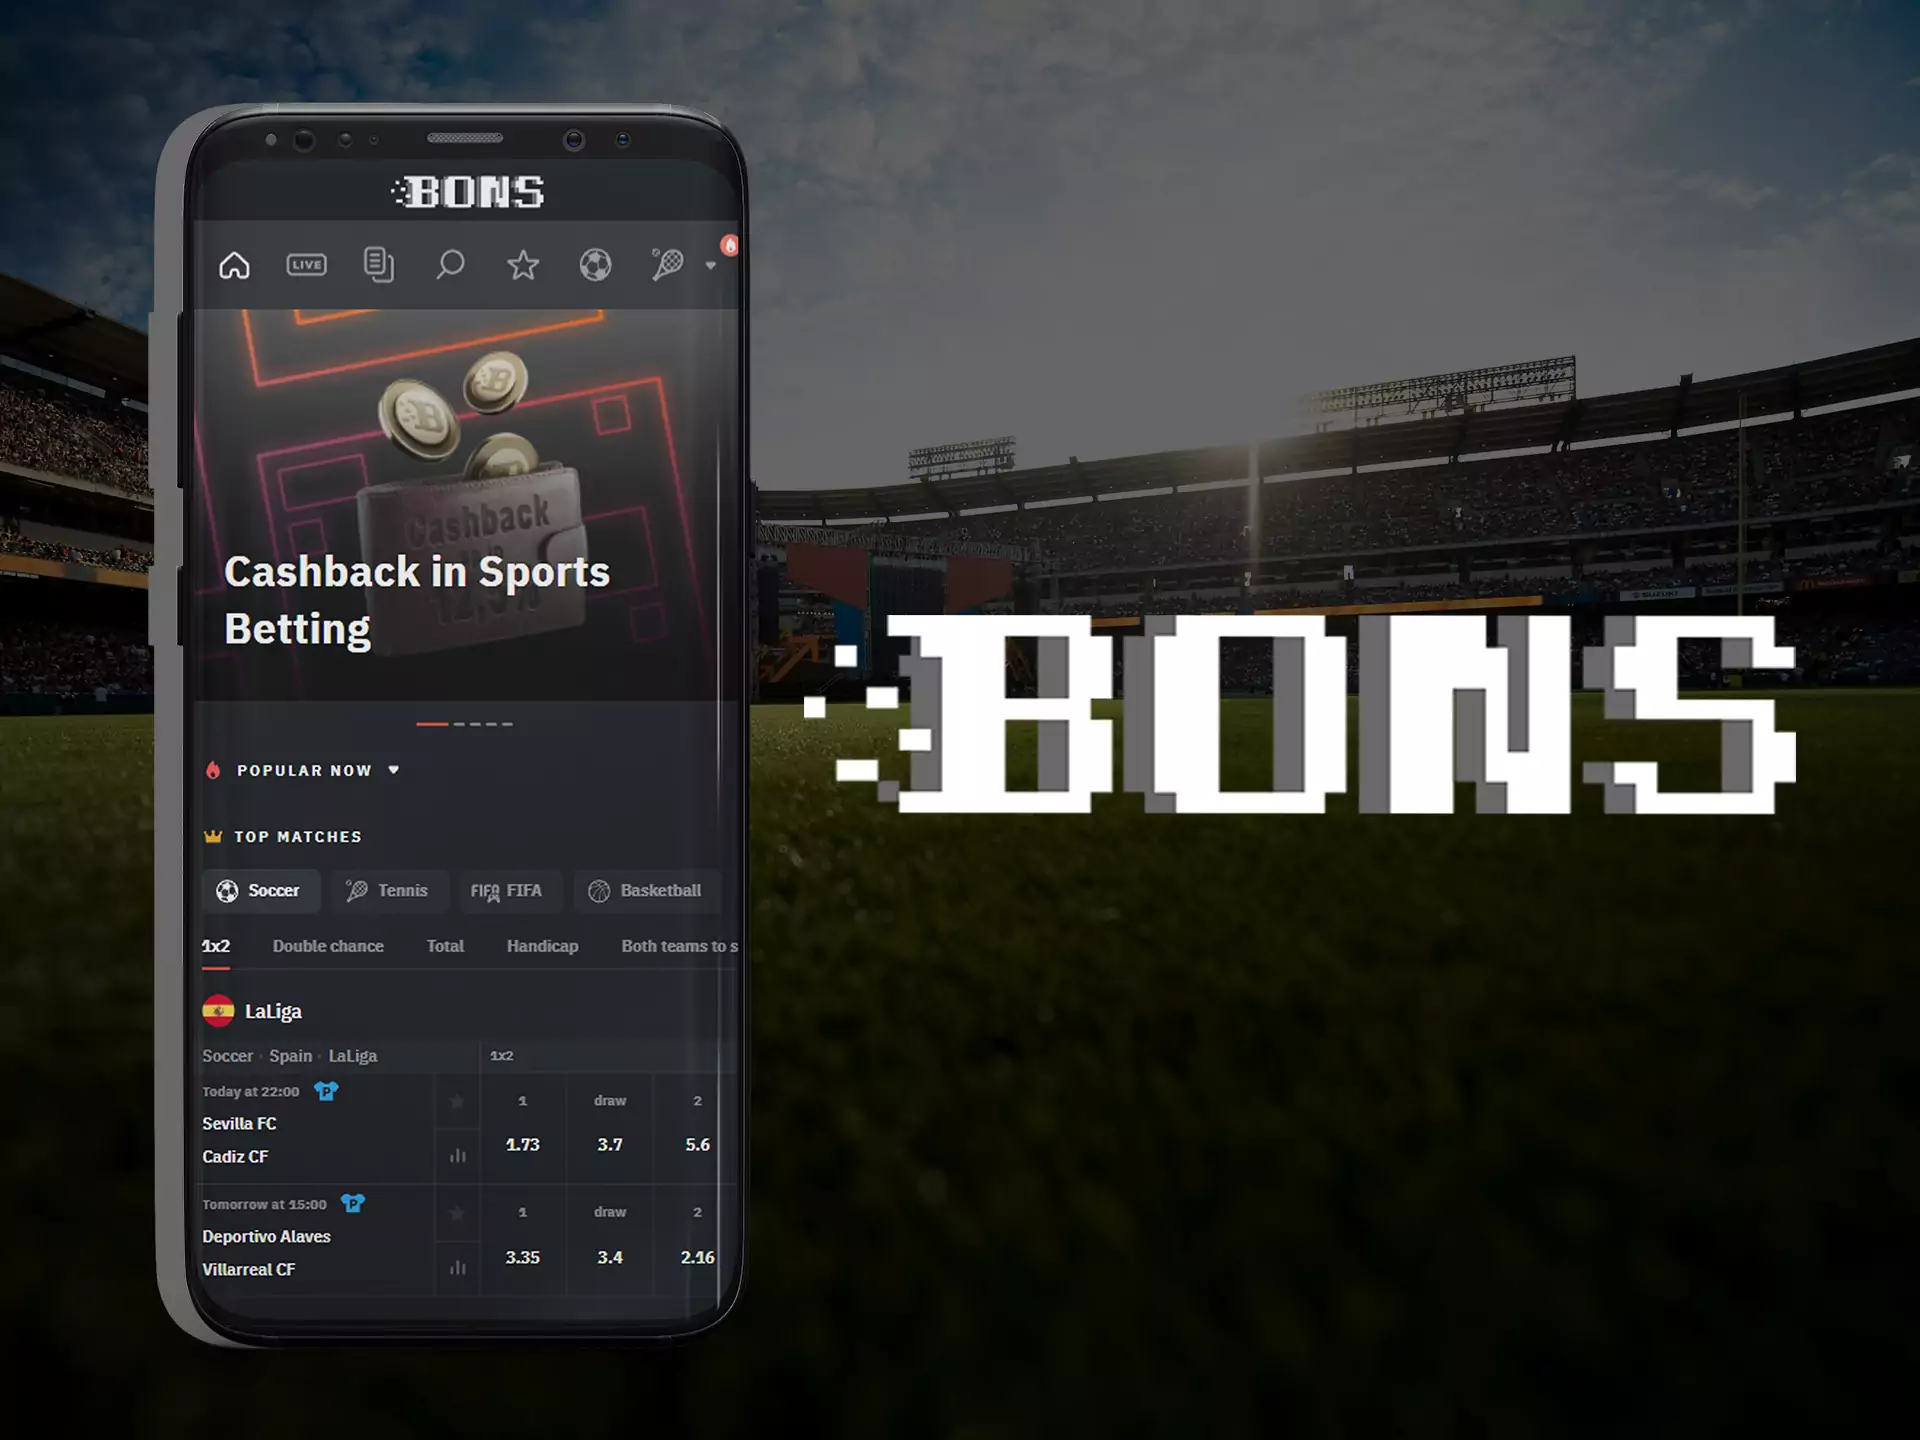 The Bons app is a notable player on the sports betting market.